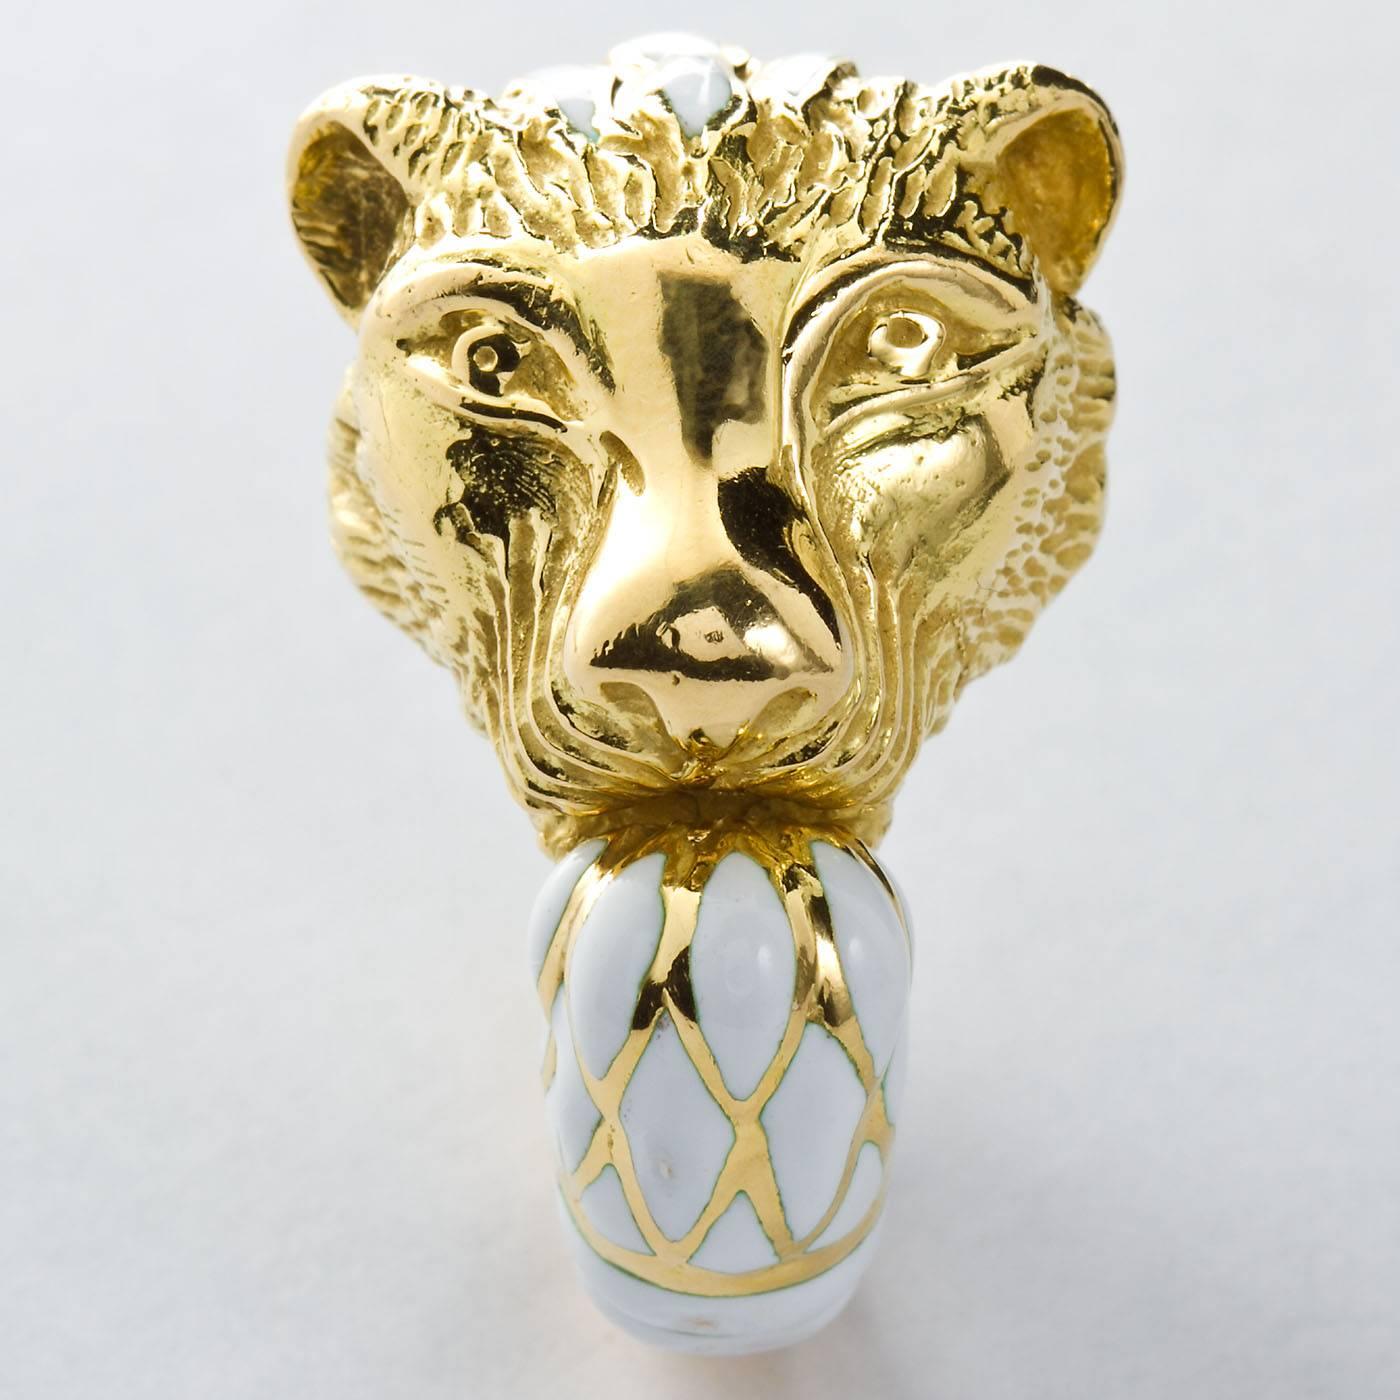 An 18 karat yellow gold and white enamel fashion ring.  Formed as a Lion's head with a white enamel on gold mane ended by enameled paw style ring tip. Signed WEBB. by David Webb.

Ring size 5-6, resizable to fit cost-free.

No. TMWJ-6565